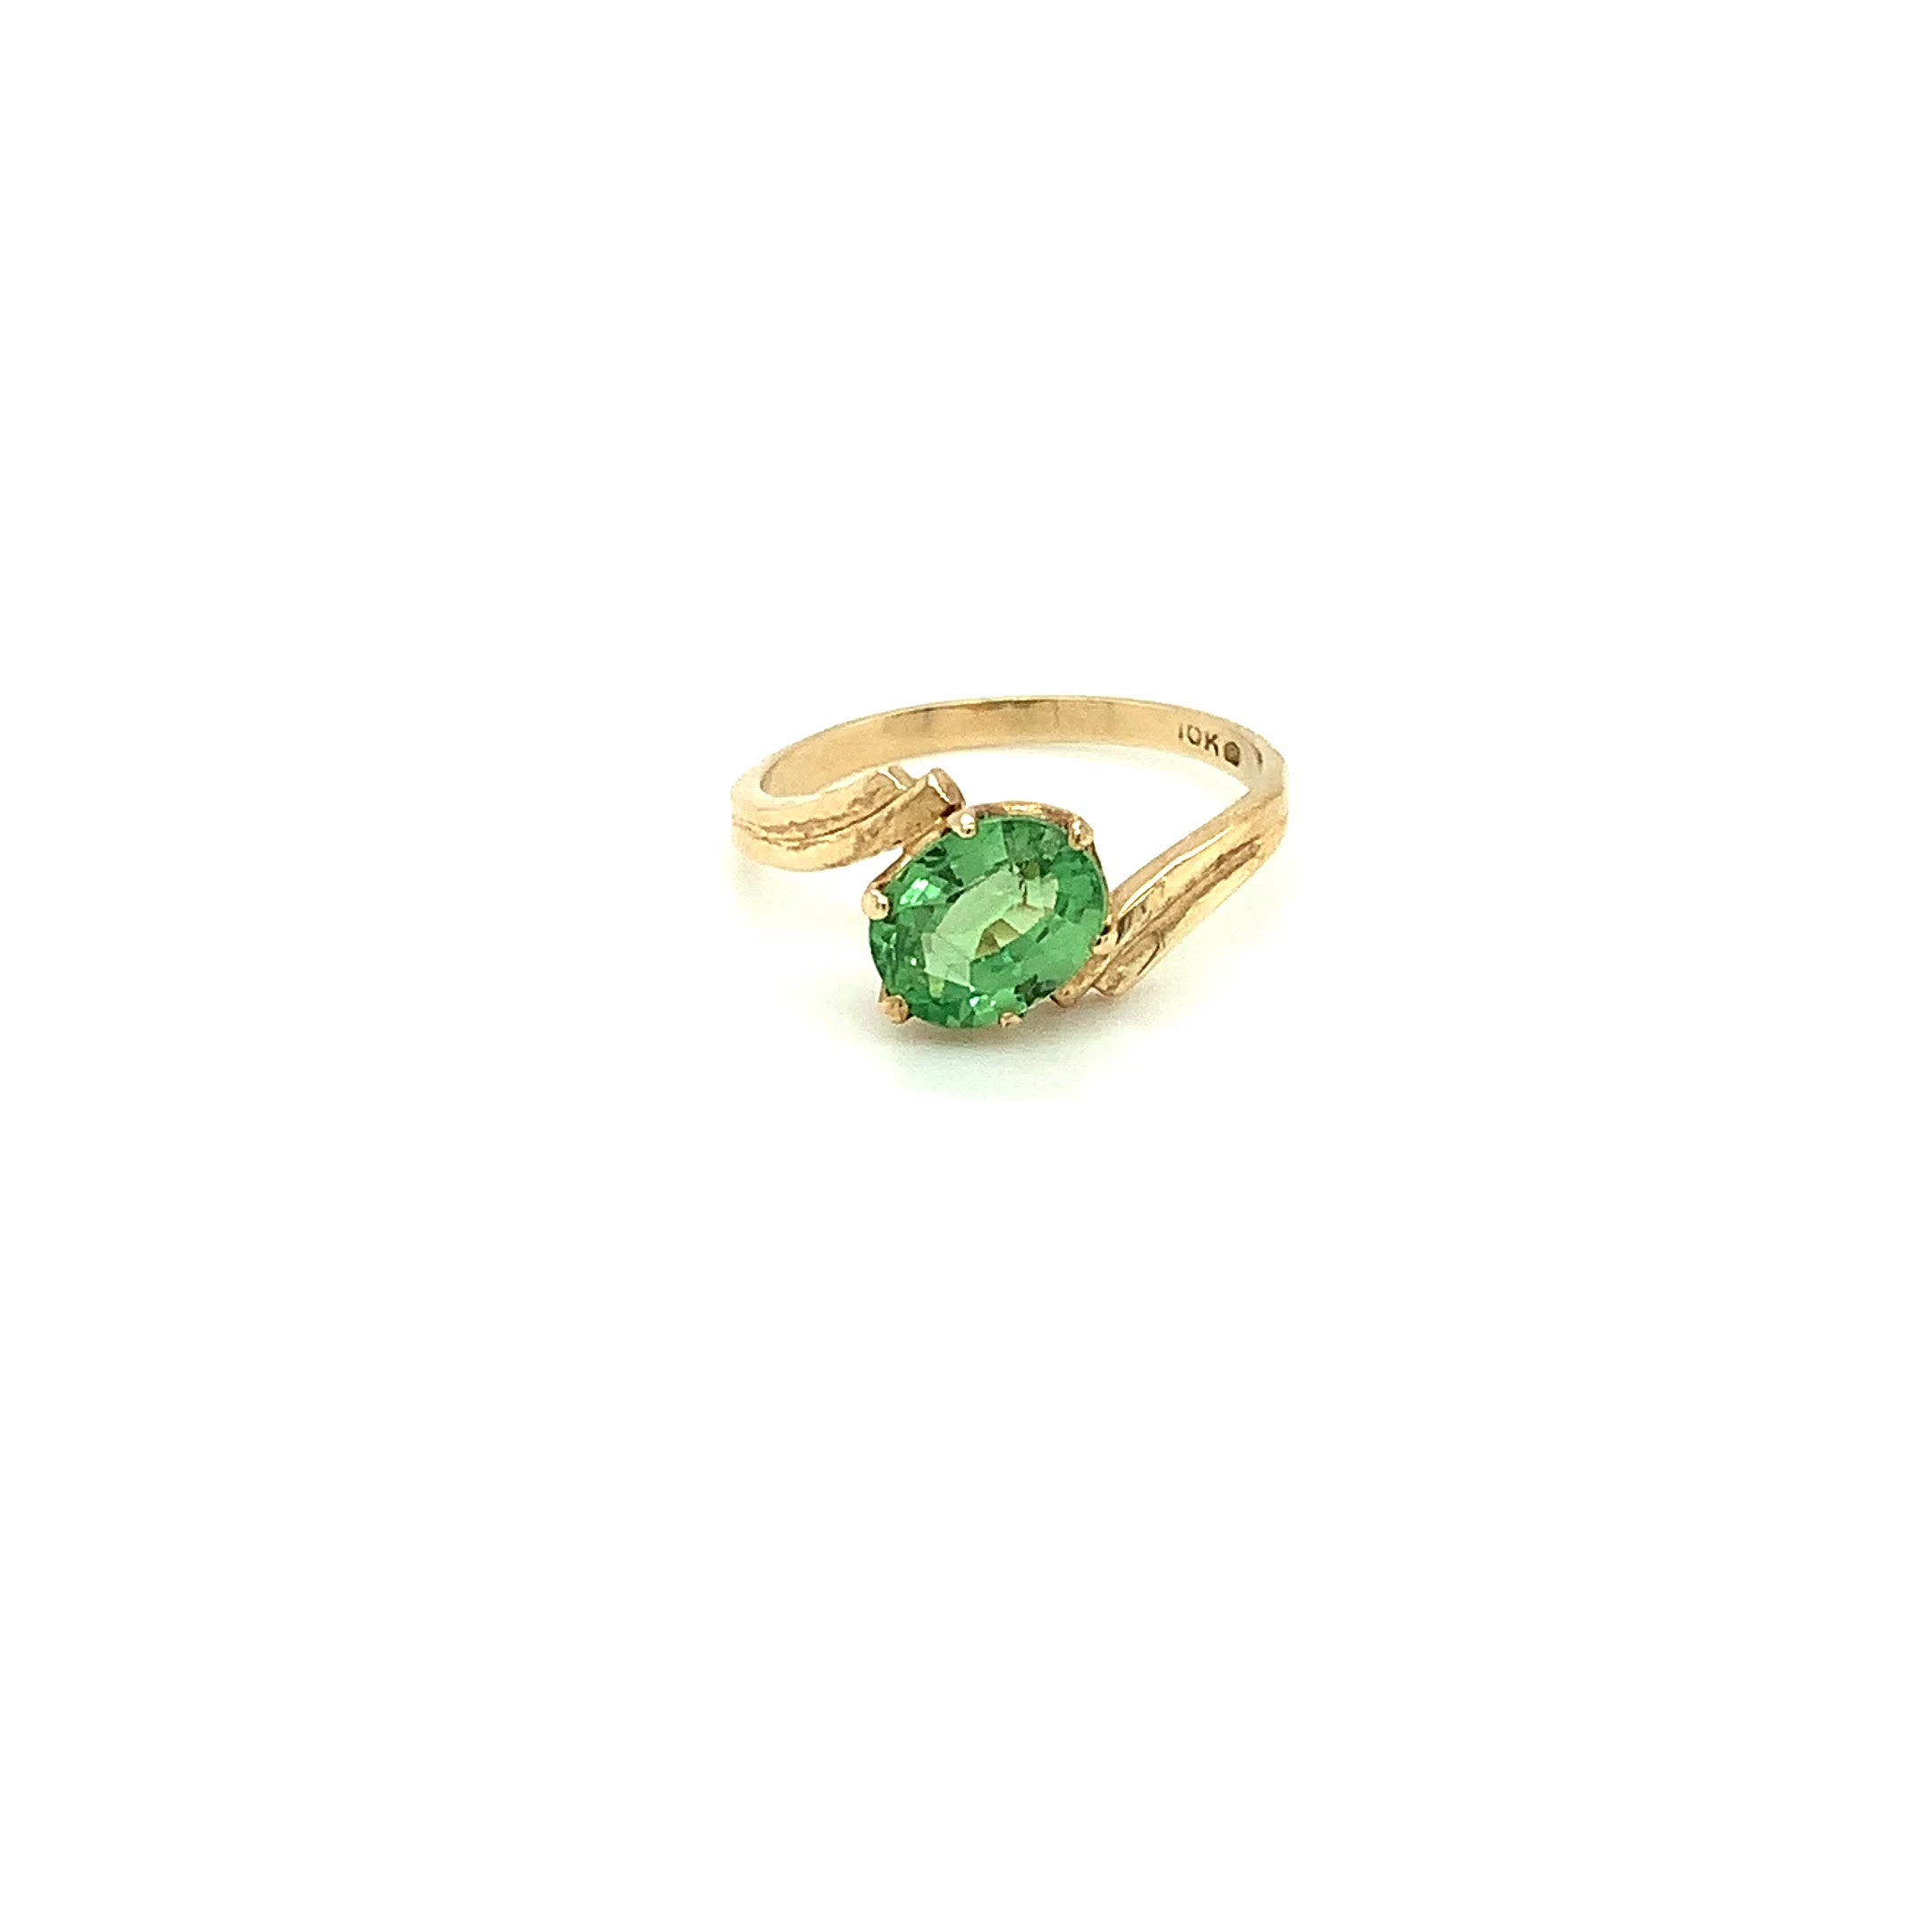 Natural Color Change Garnet Ring 10K Solid Gold 1.68ct Solitaire Ring Green Ring January Birthstone Ring Gemstone Ring Women's Ring Jewelry